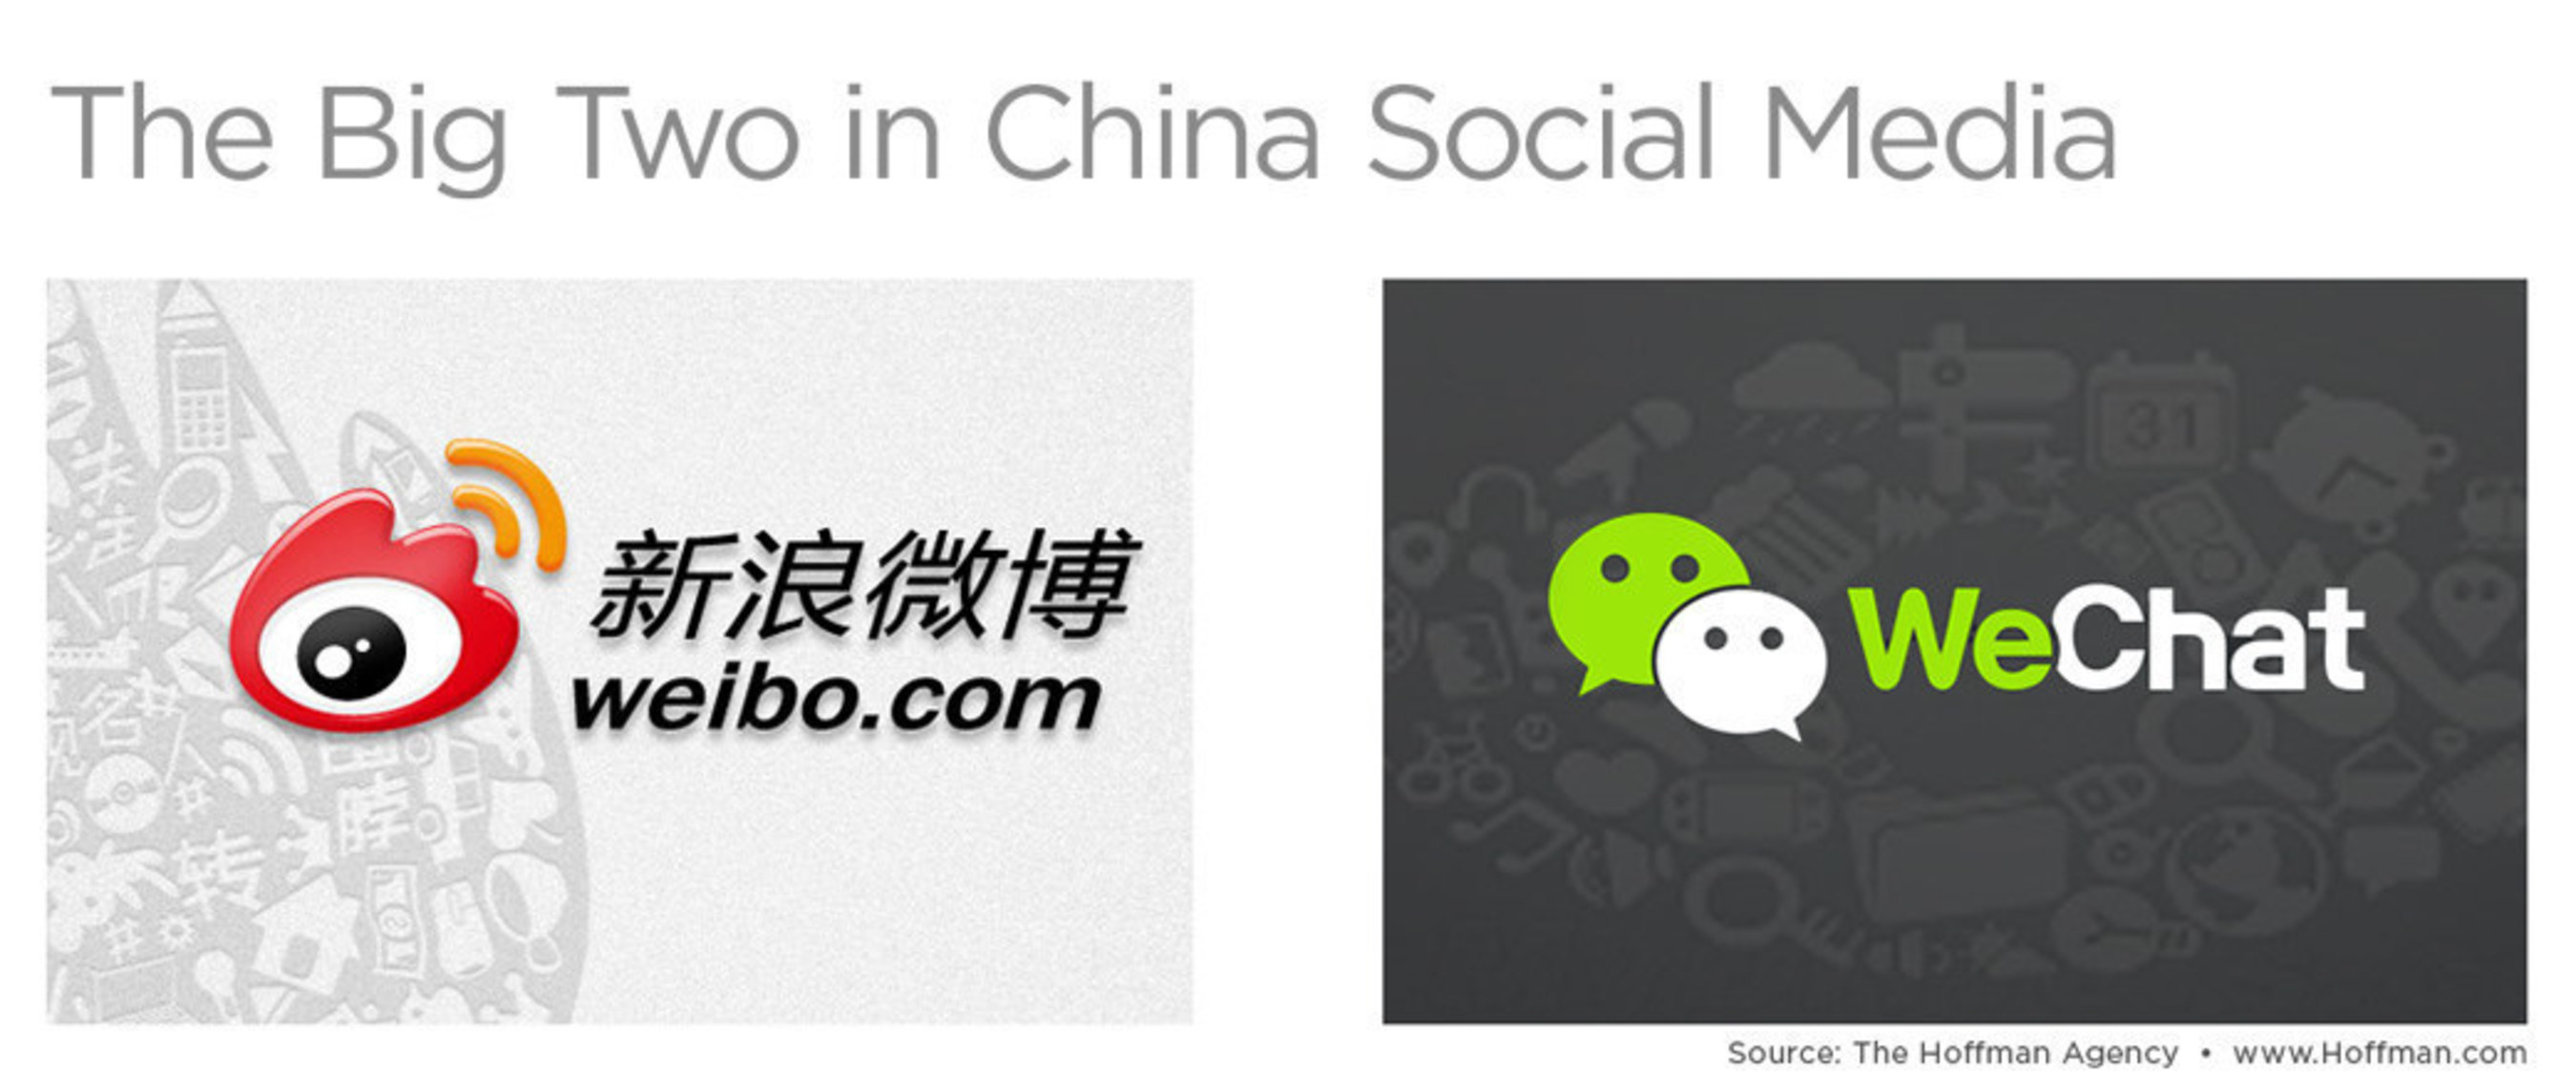 The seminar "Cracking the China PR Code" will address all forms of media including social media